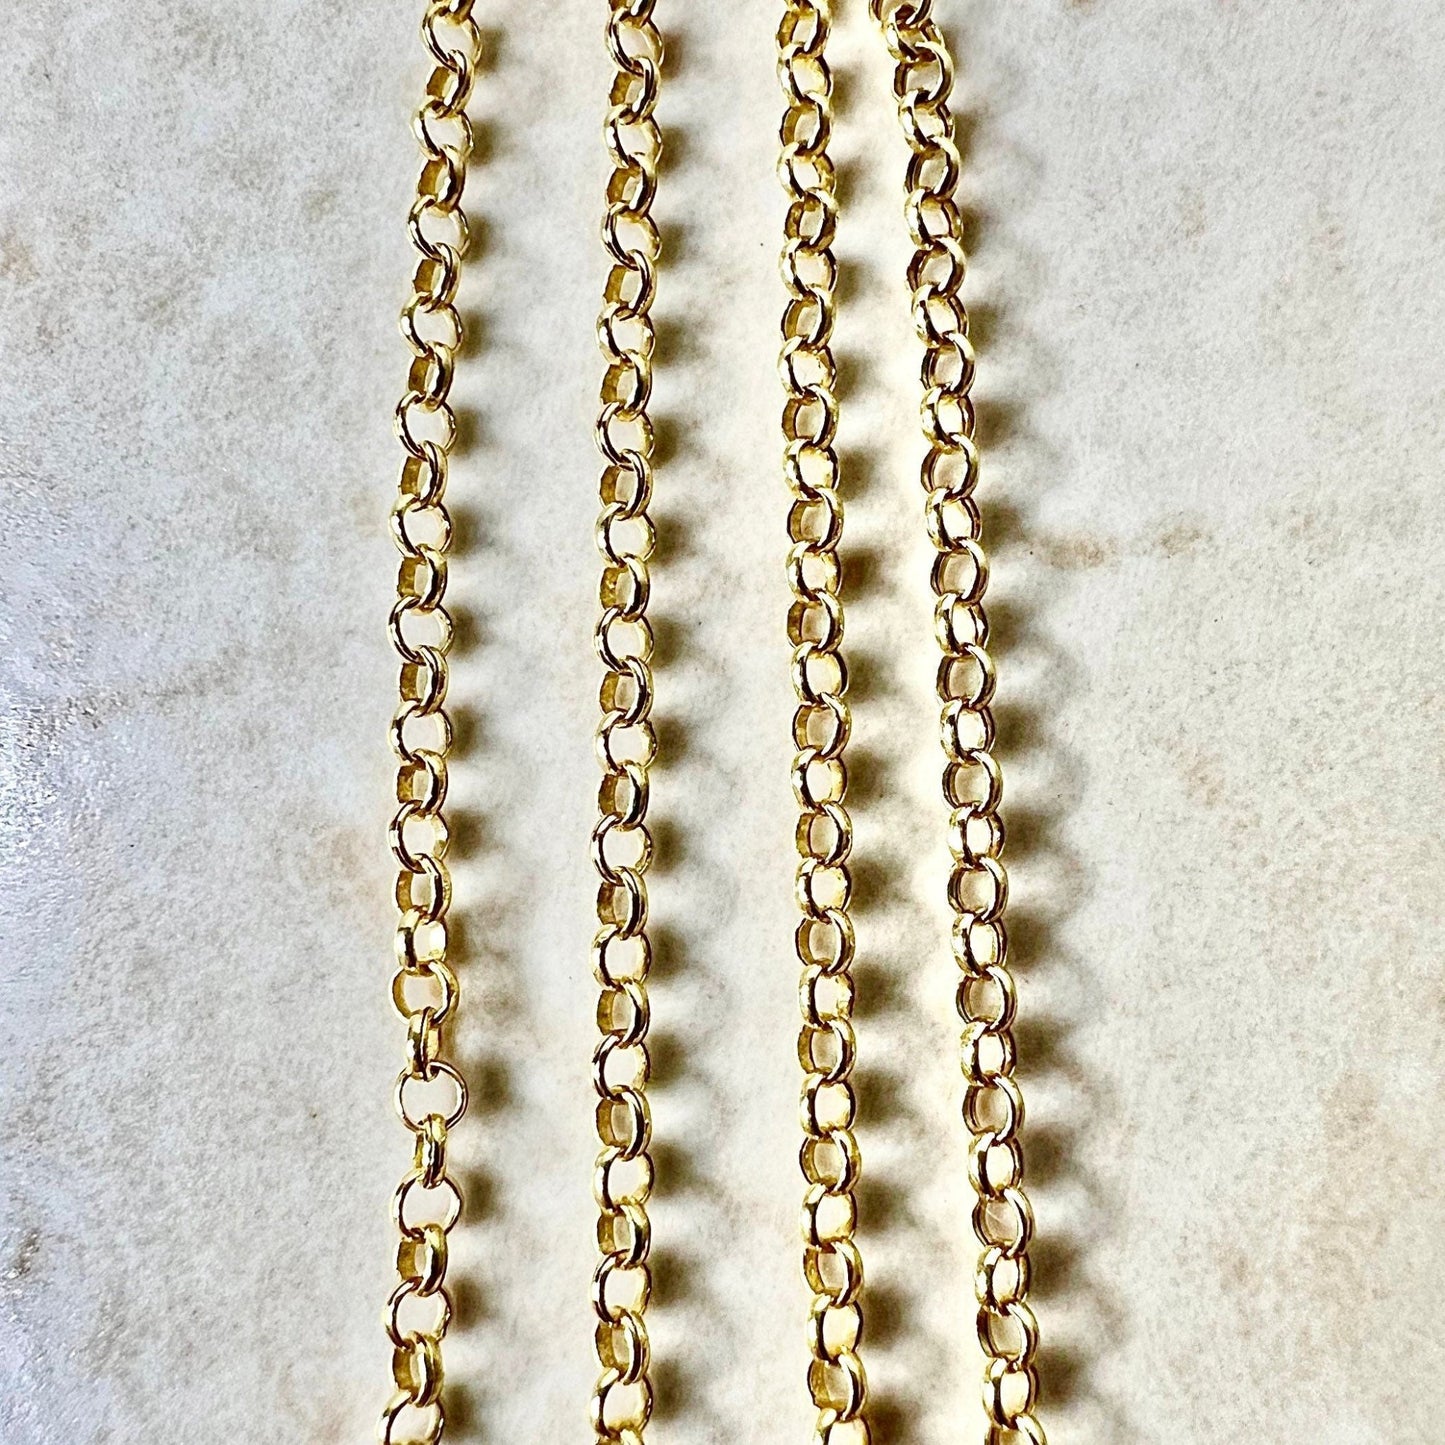 Vintage 14K Yellow Gold Rolo Chain - 20” Gold Chain - Yellow Gold Necklace - Italian Gold Chain Necklace - Best Gifts For Her - 14K Gold